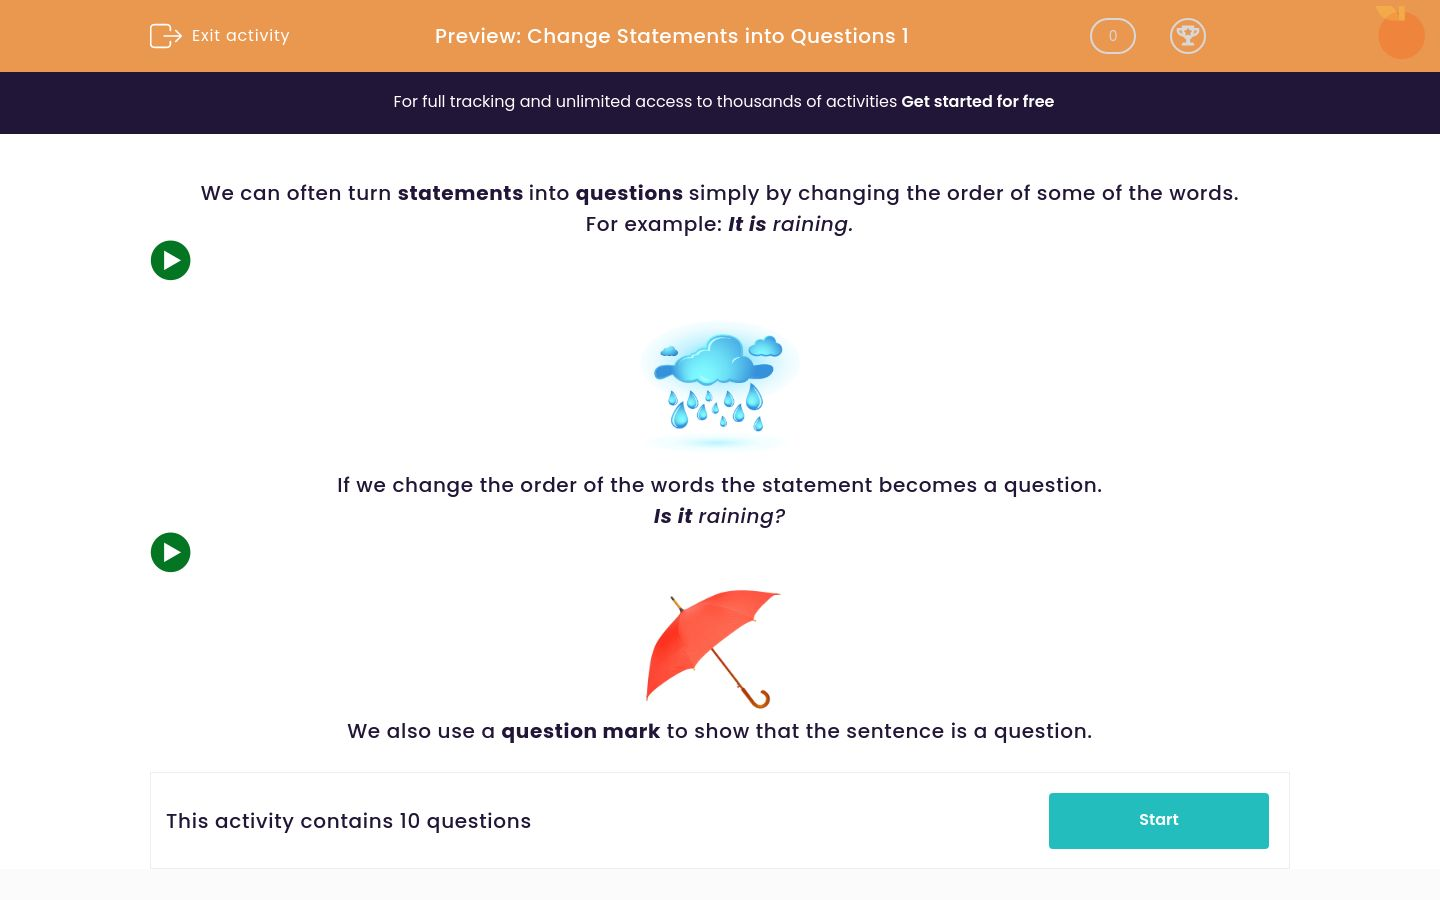 change-statements-into-questions-and-questions-into-statements